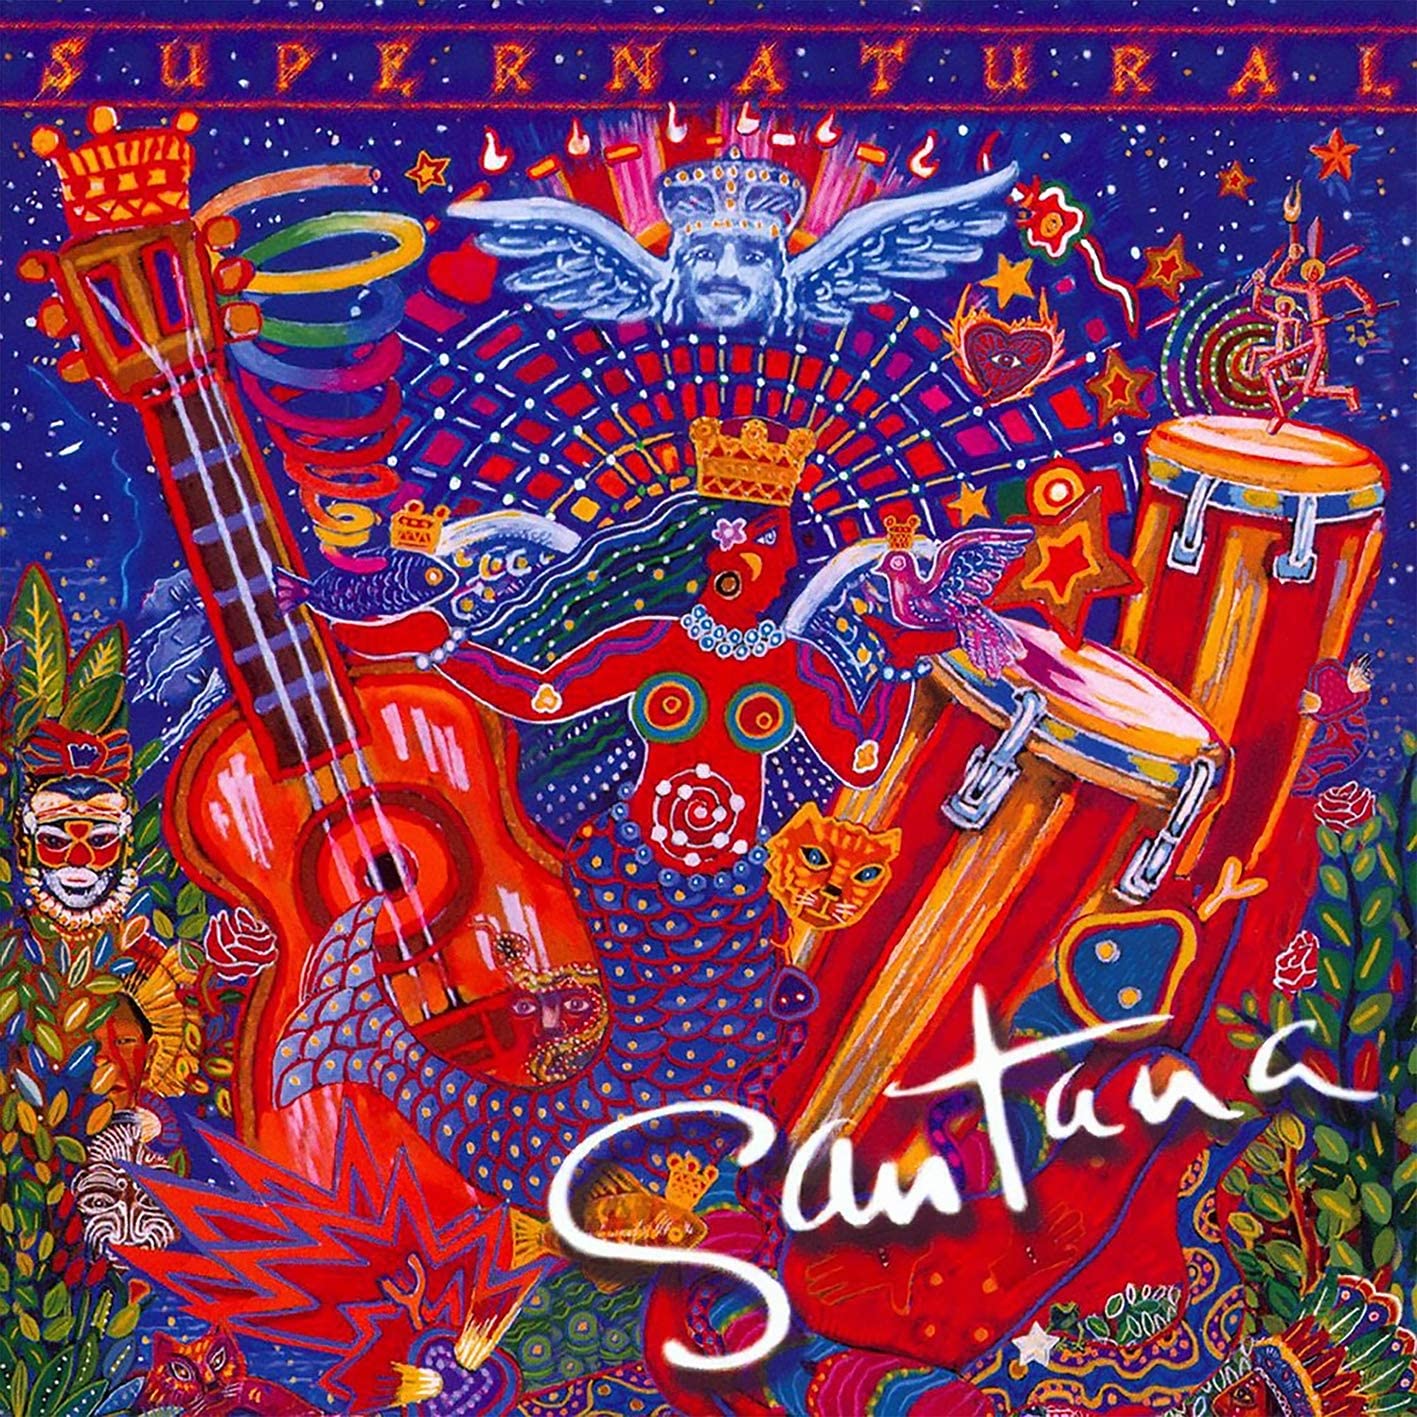 Man It's A Hot One.... Santana's massive duets album on Vinyl featuring Smooth (with Rob Thomas) one of the biggest selling singles of all time.